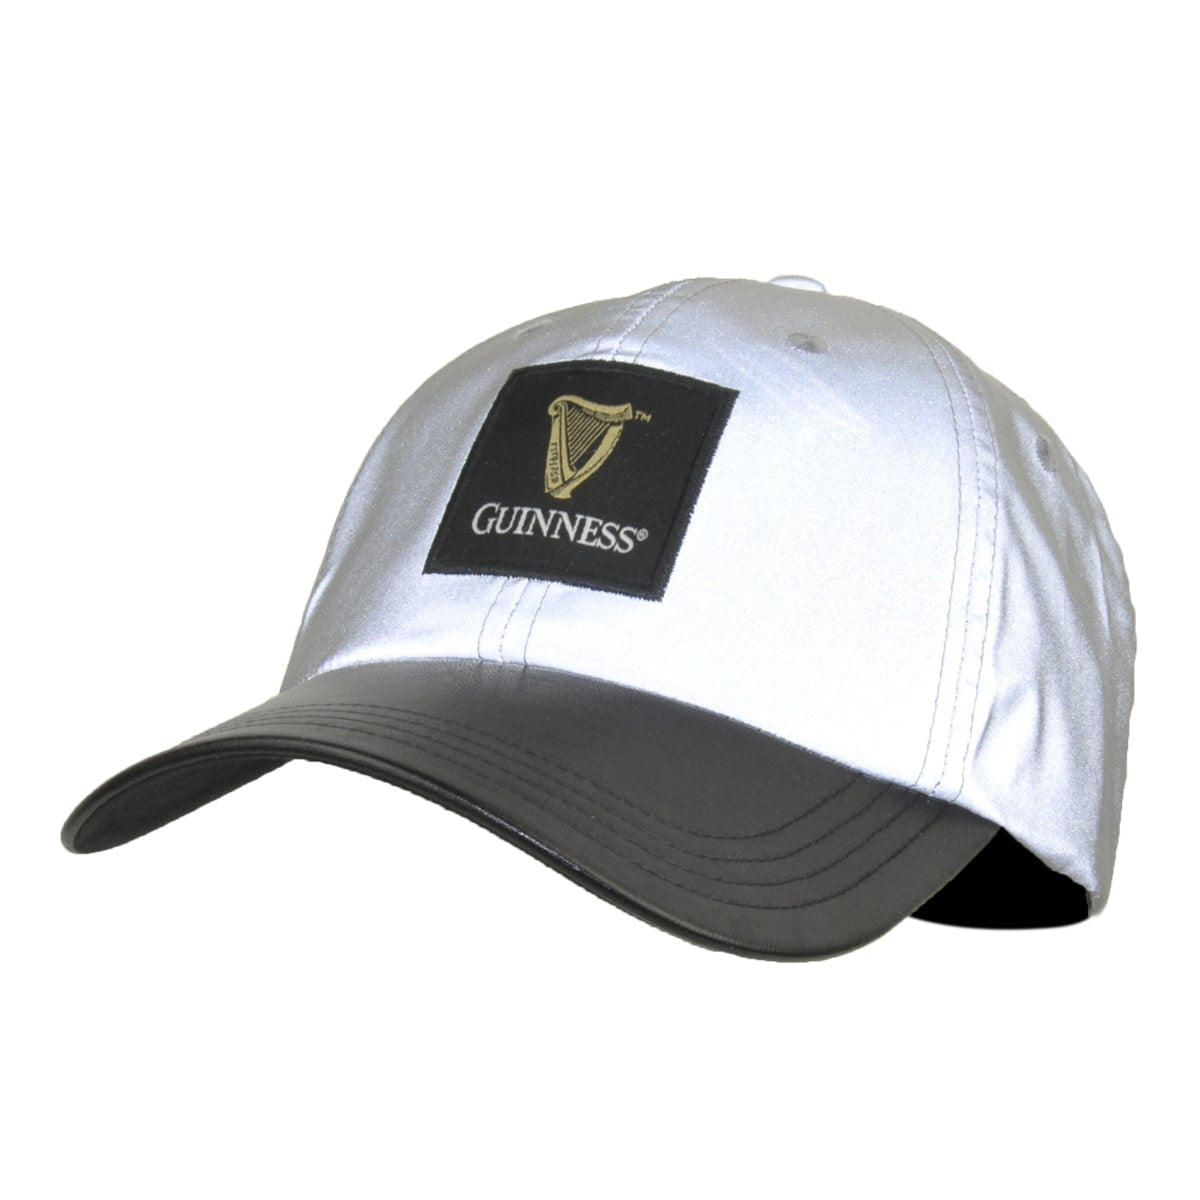 Reflective Guinness Reflective Cap with adjustable size.